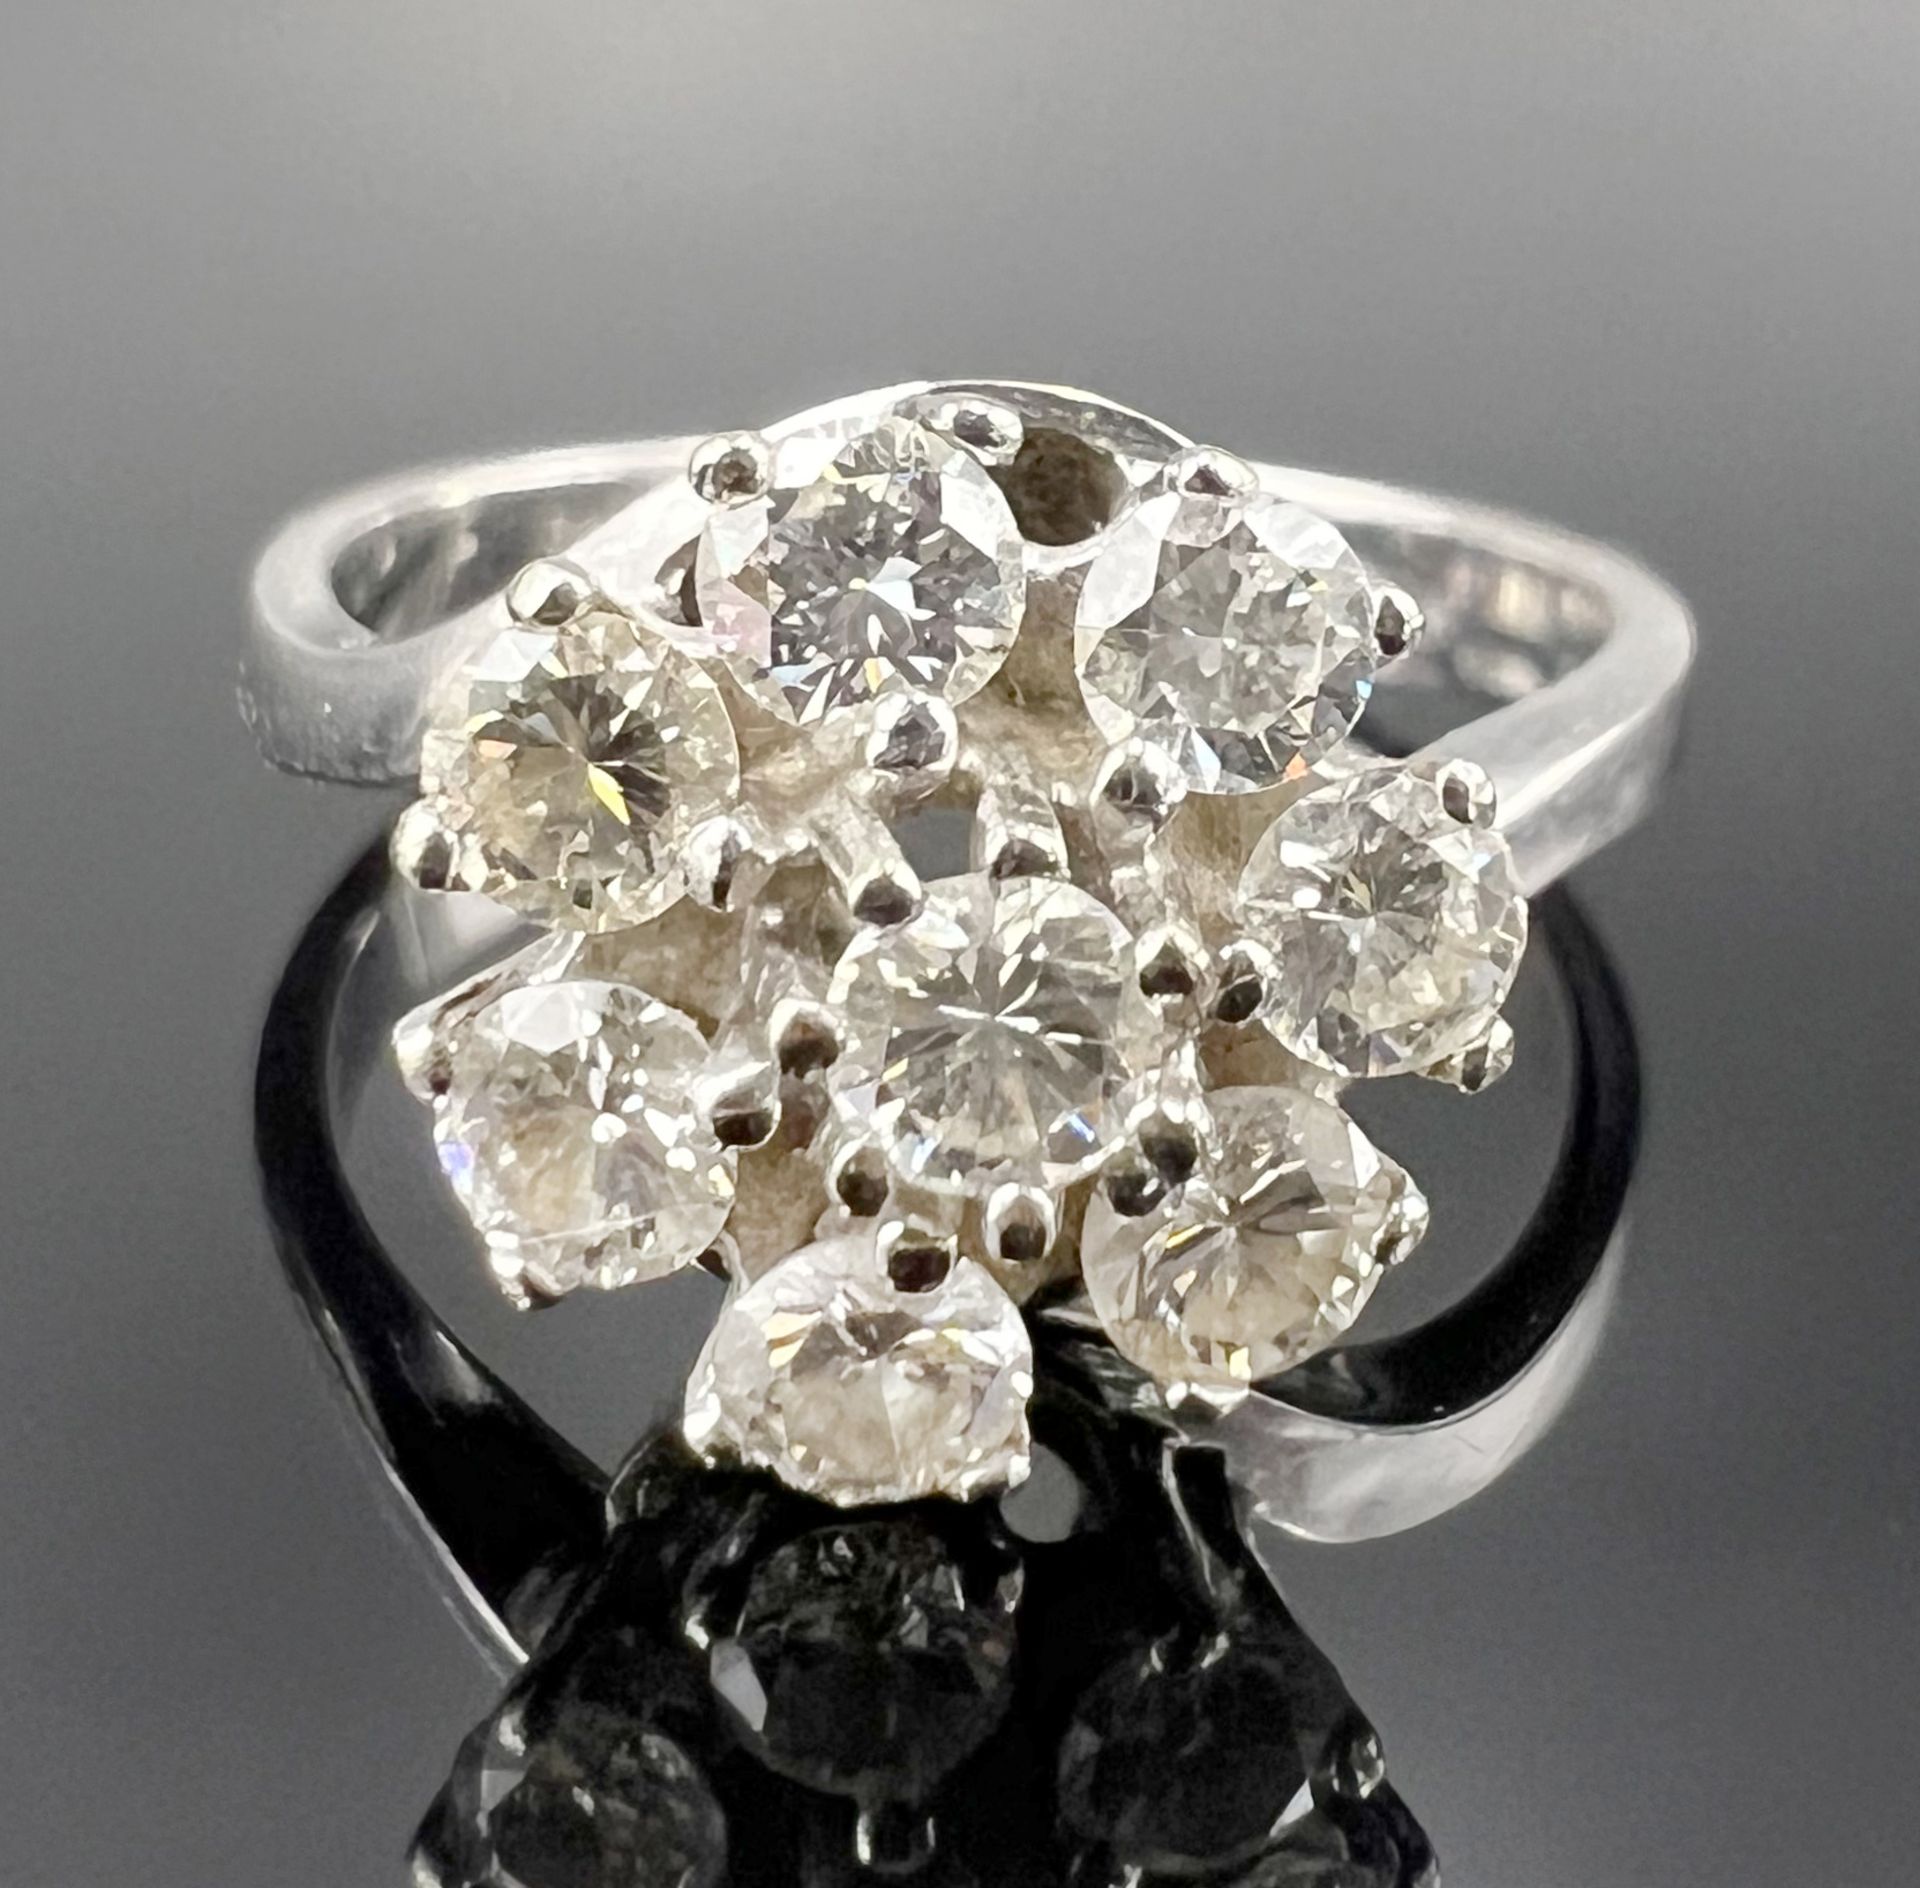 Ladies' ring 585 white gold with eight brilliant-cut diamonds. - Image 2 of 8